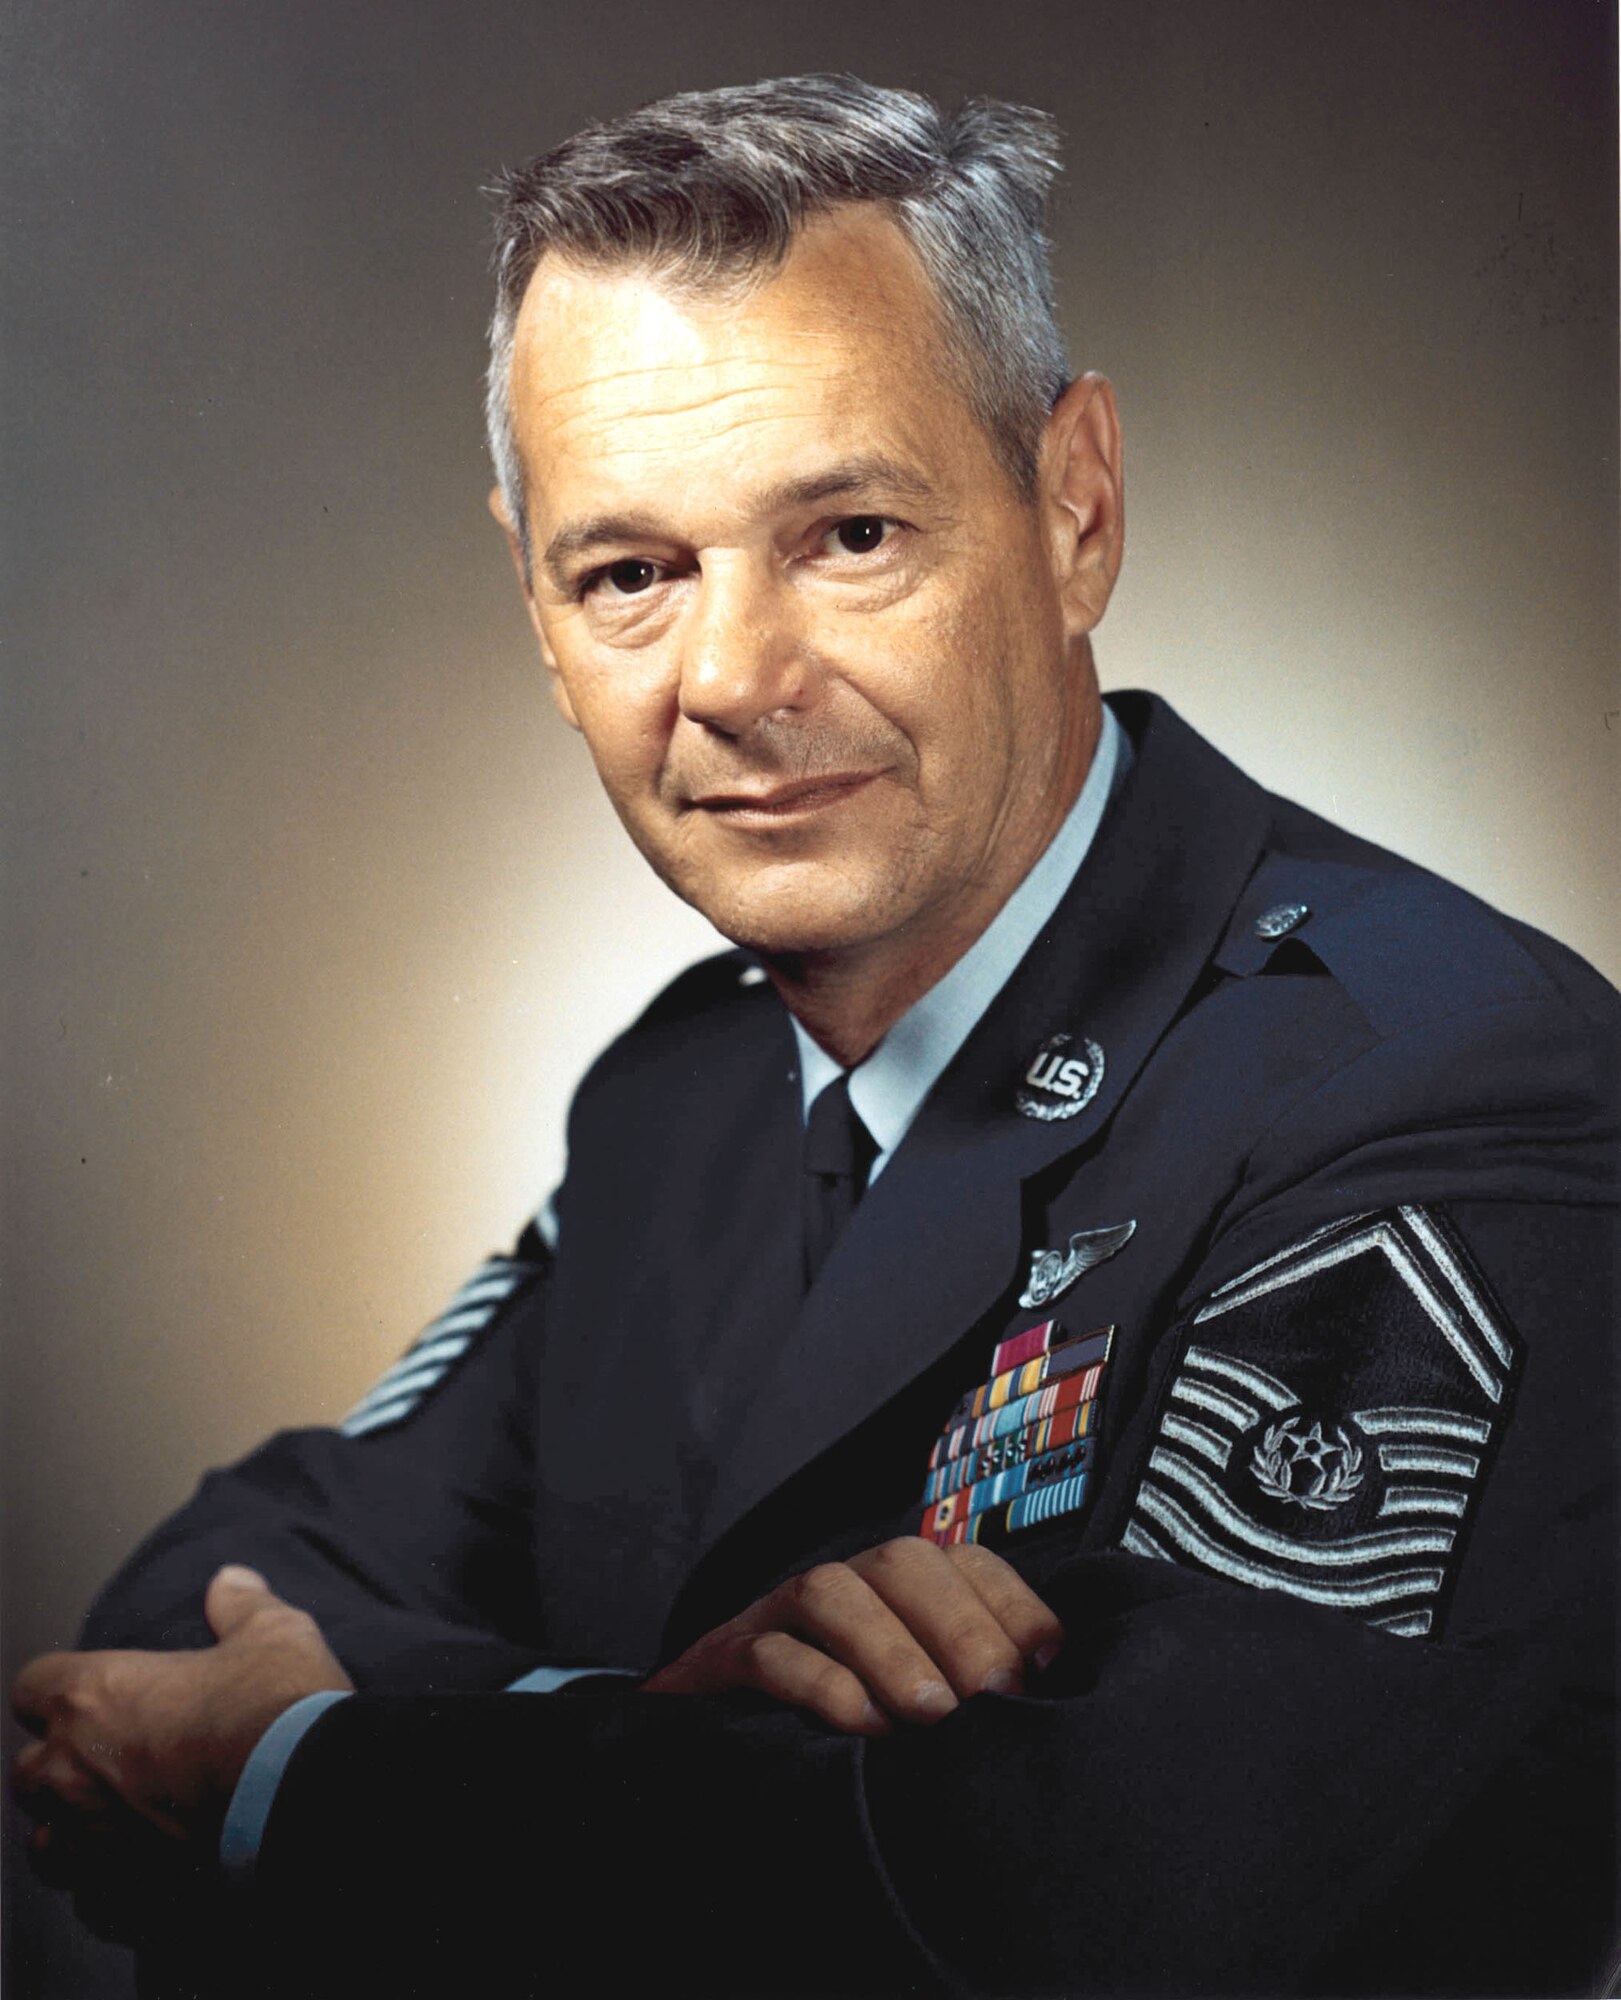 Chief Msater Sgt. of the Air Force Paul Airey is shown here in his official photo while holding the top enlisted position. (U.S. Air Force Official Photo)